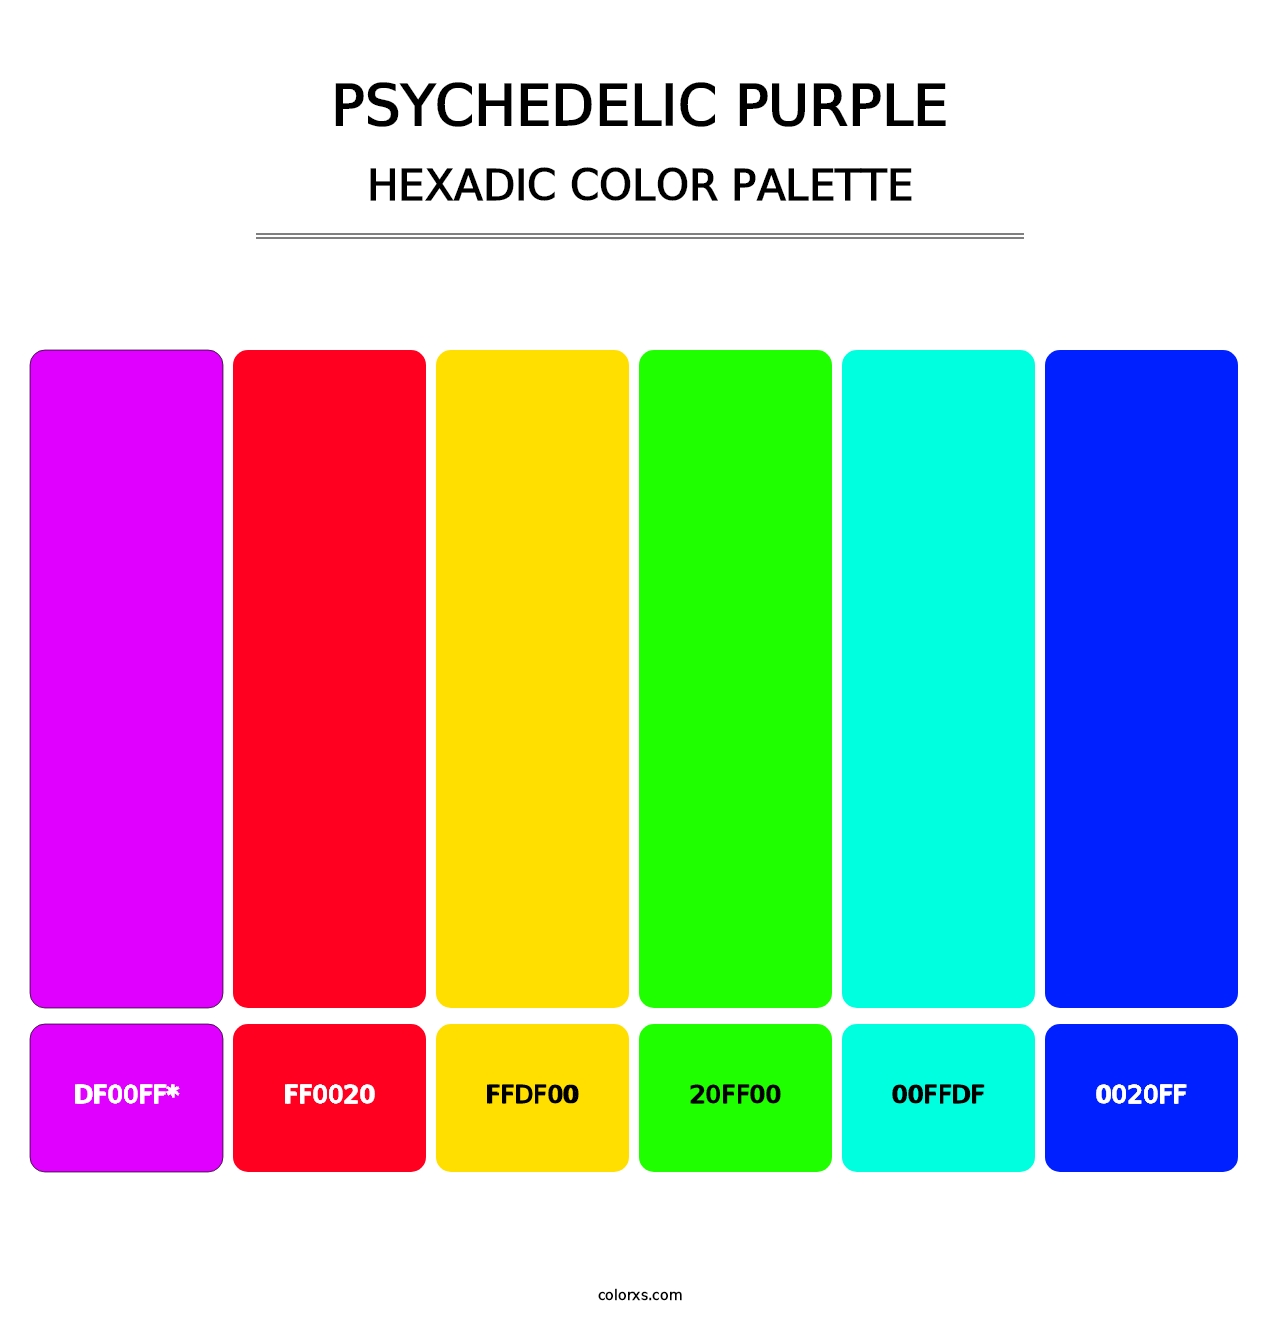 Psychedelic Purple - Hexadic Color Palette